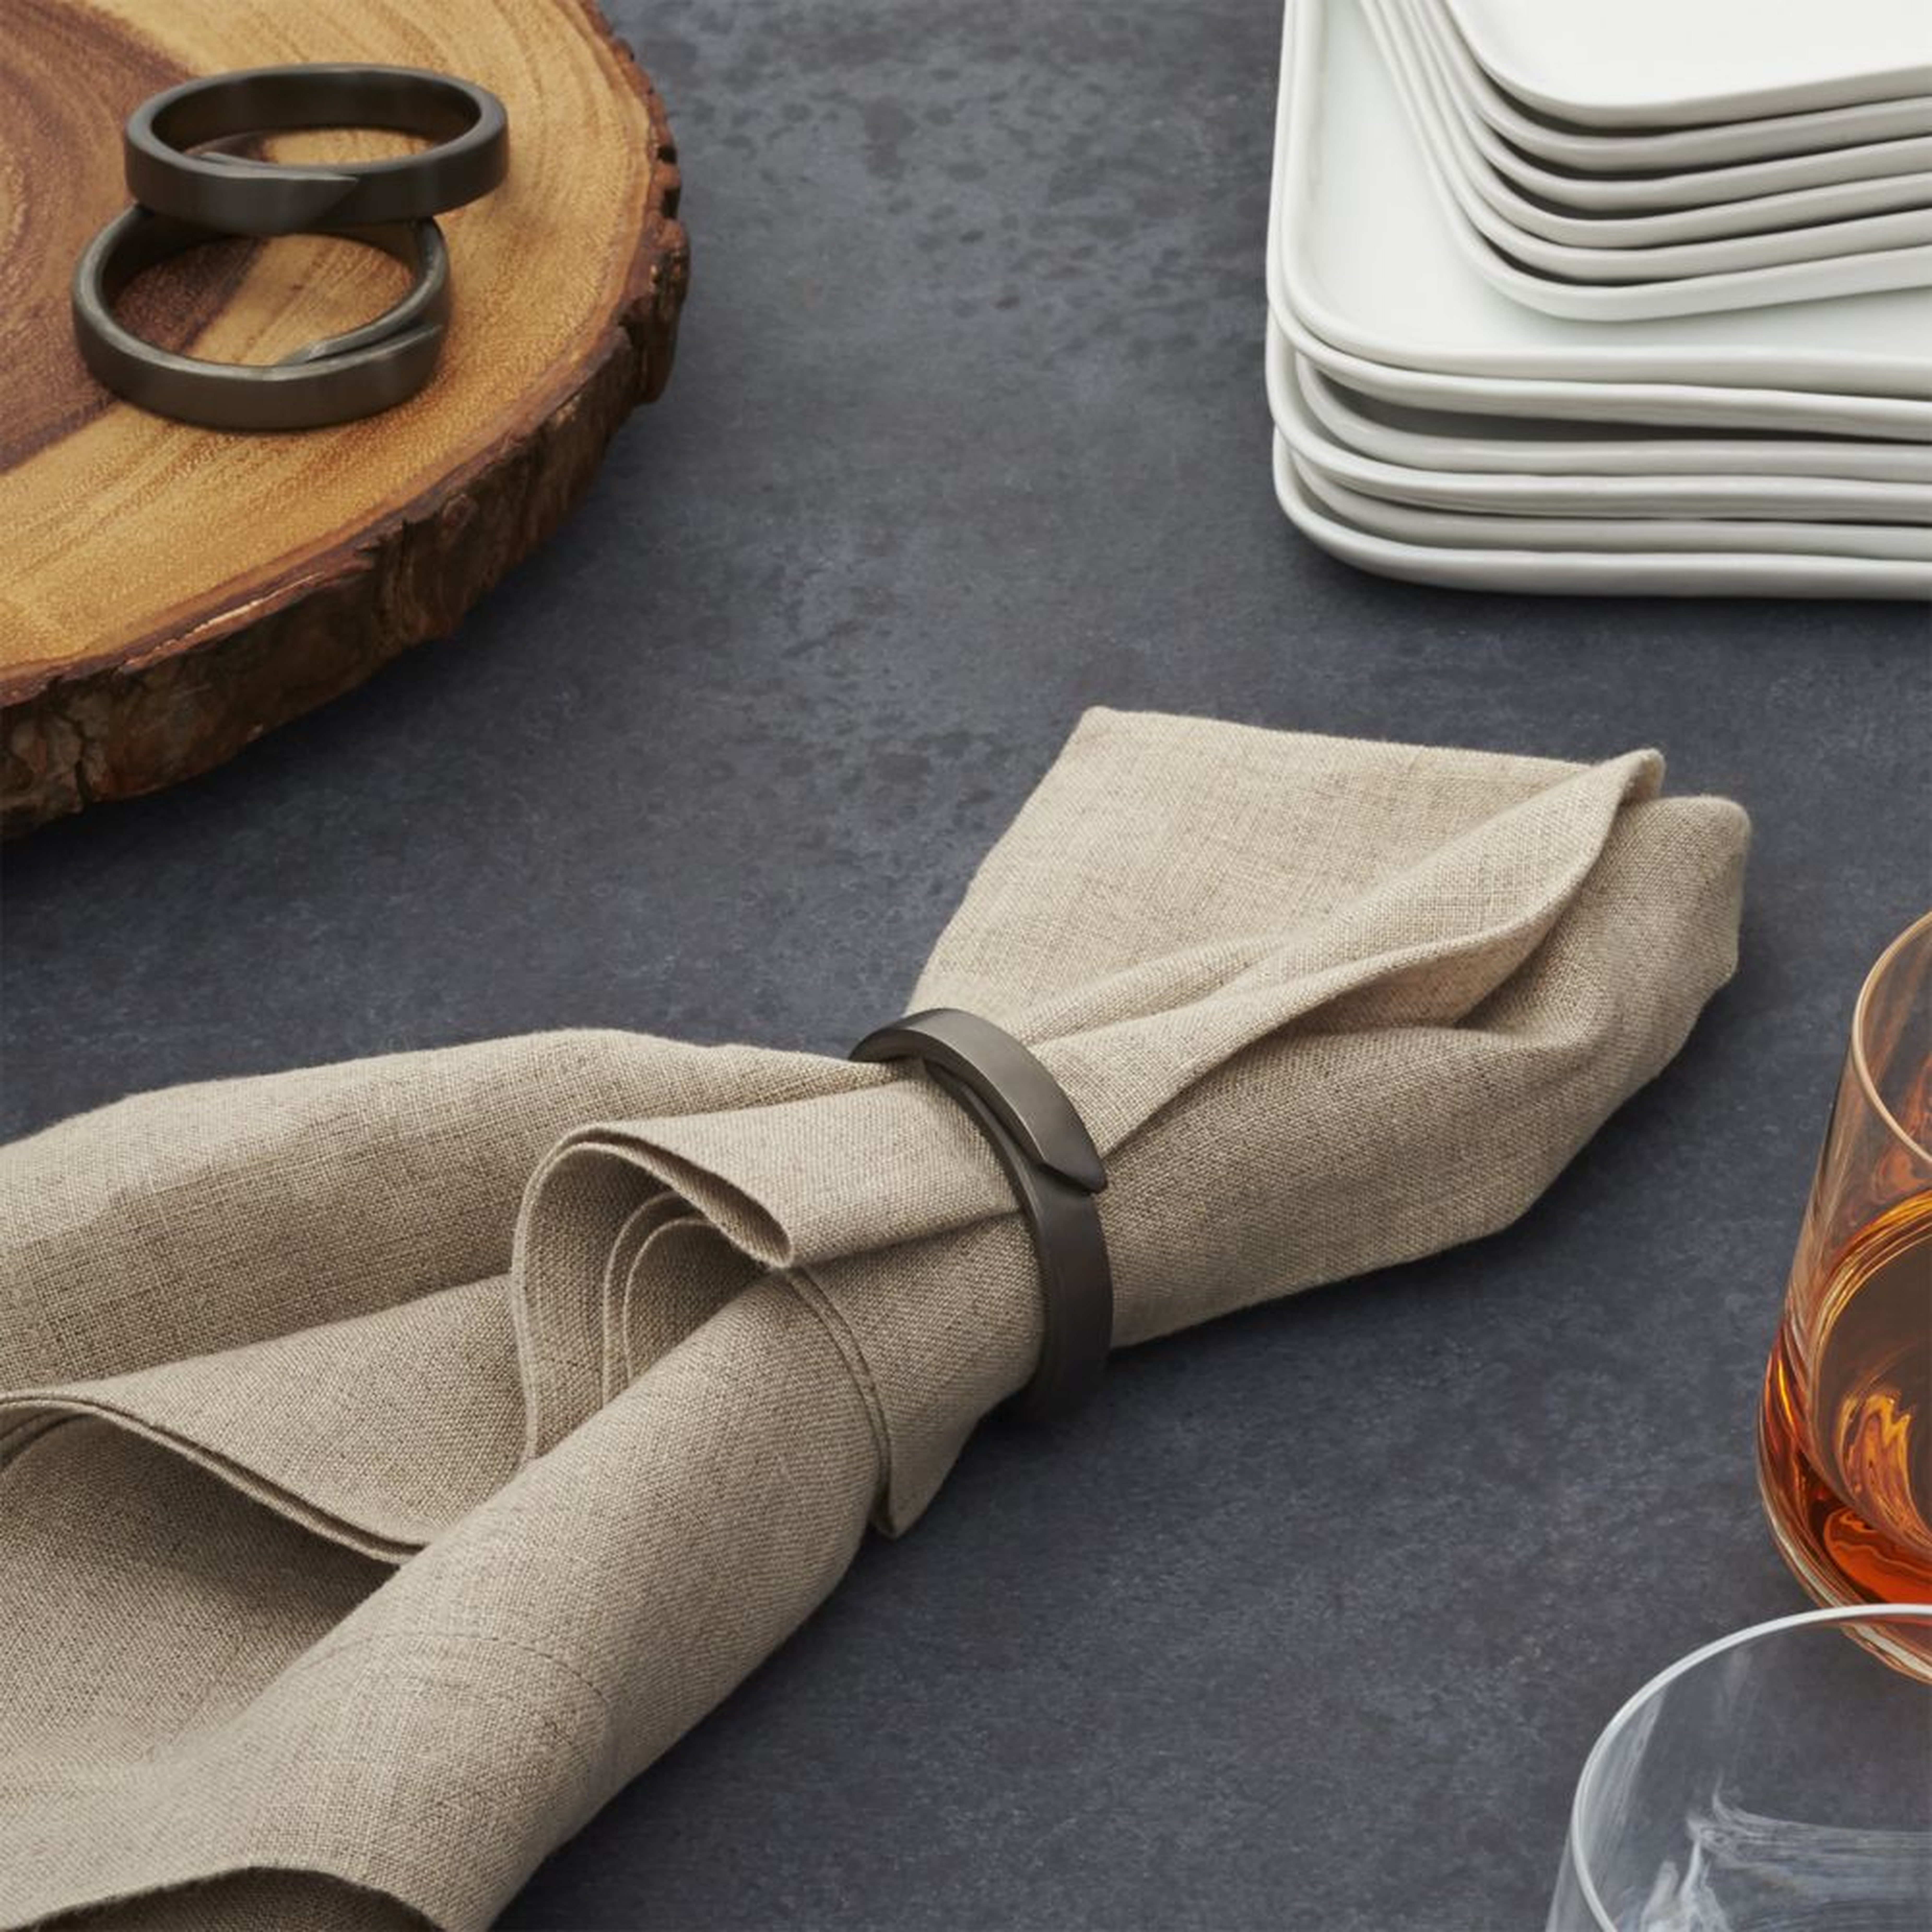 Wrap Black Napkin Ring - Crate and Barrel